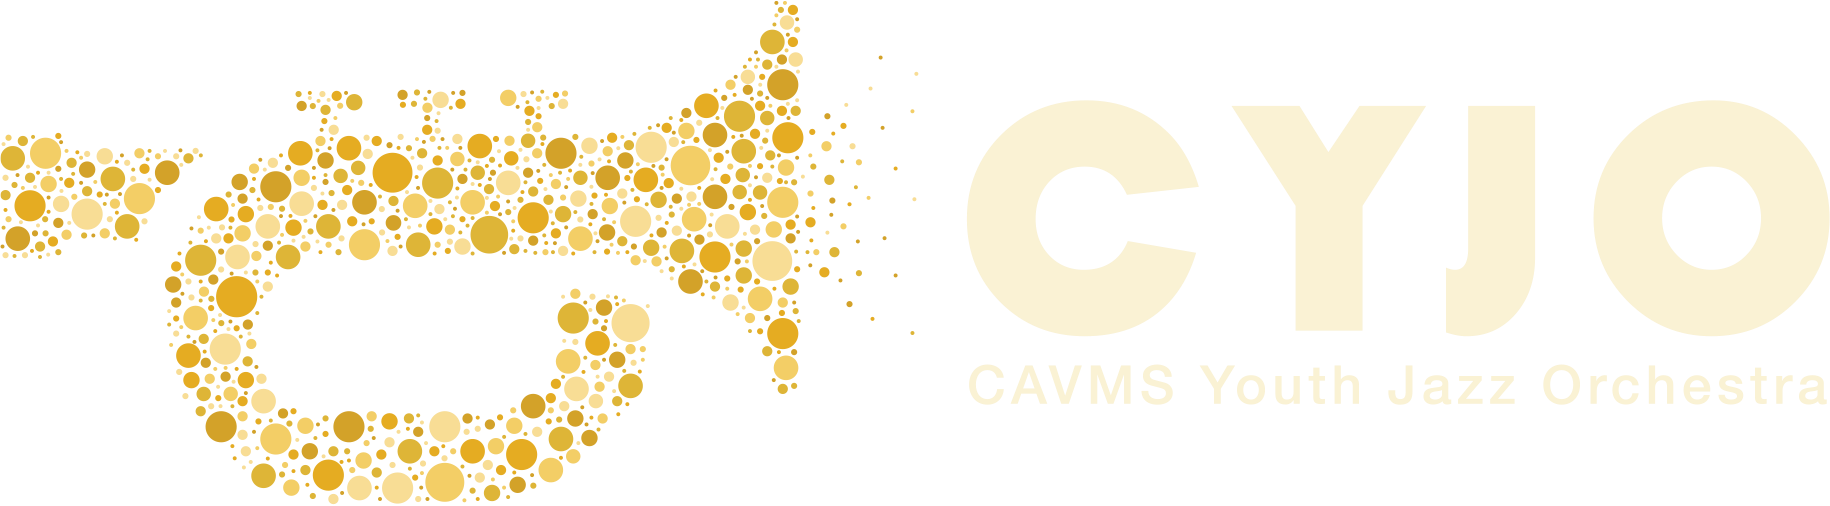 CAVMS Youth Orchestra